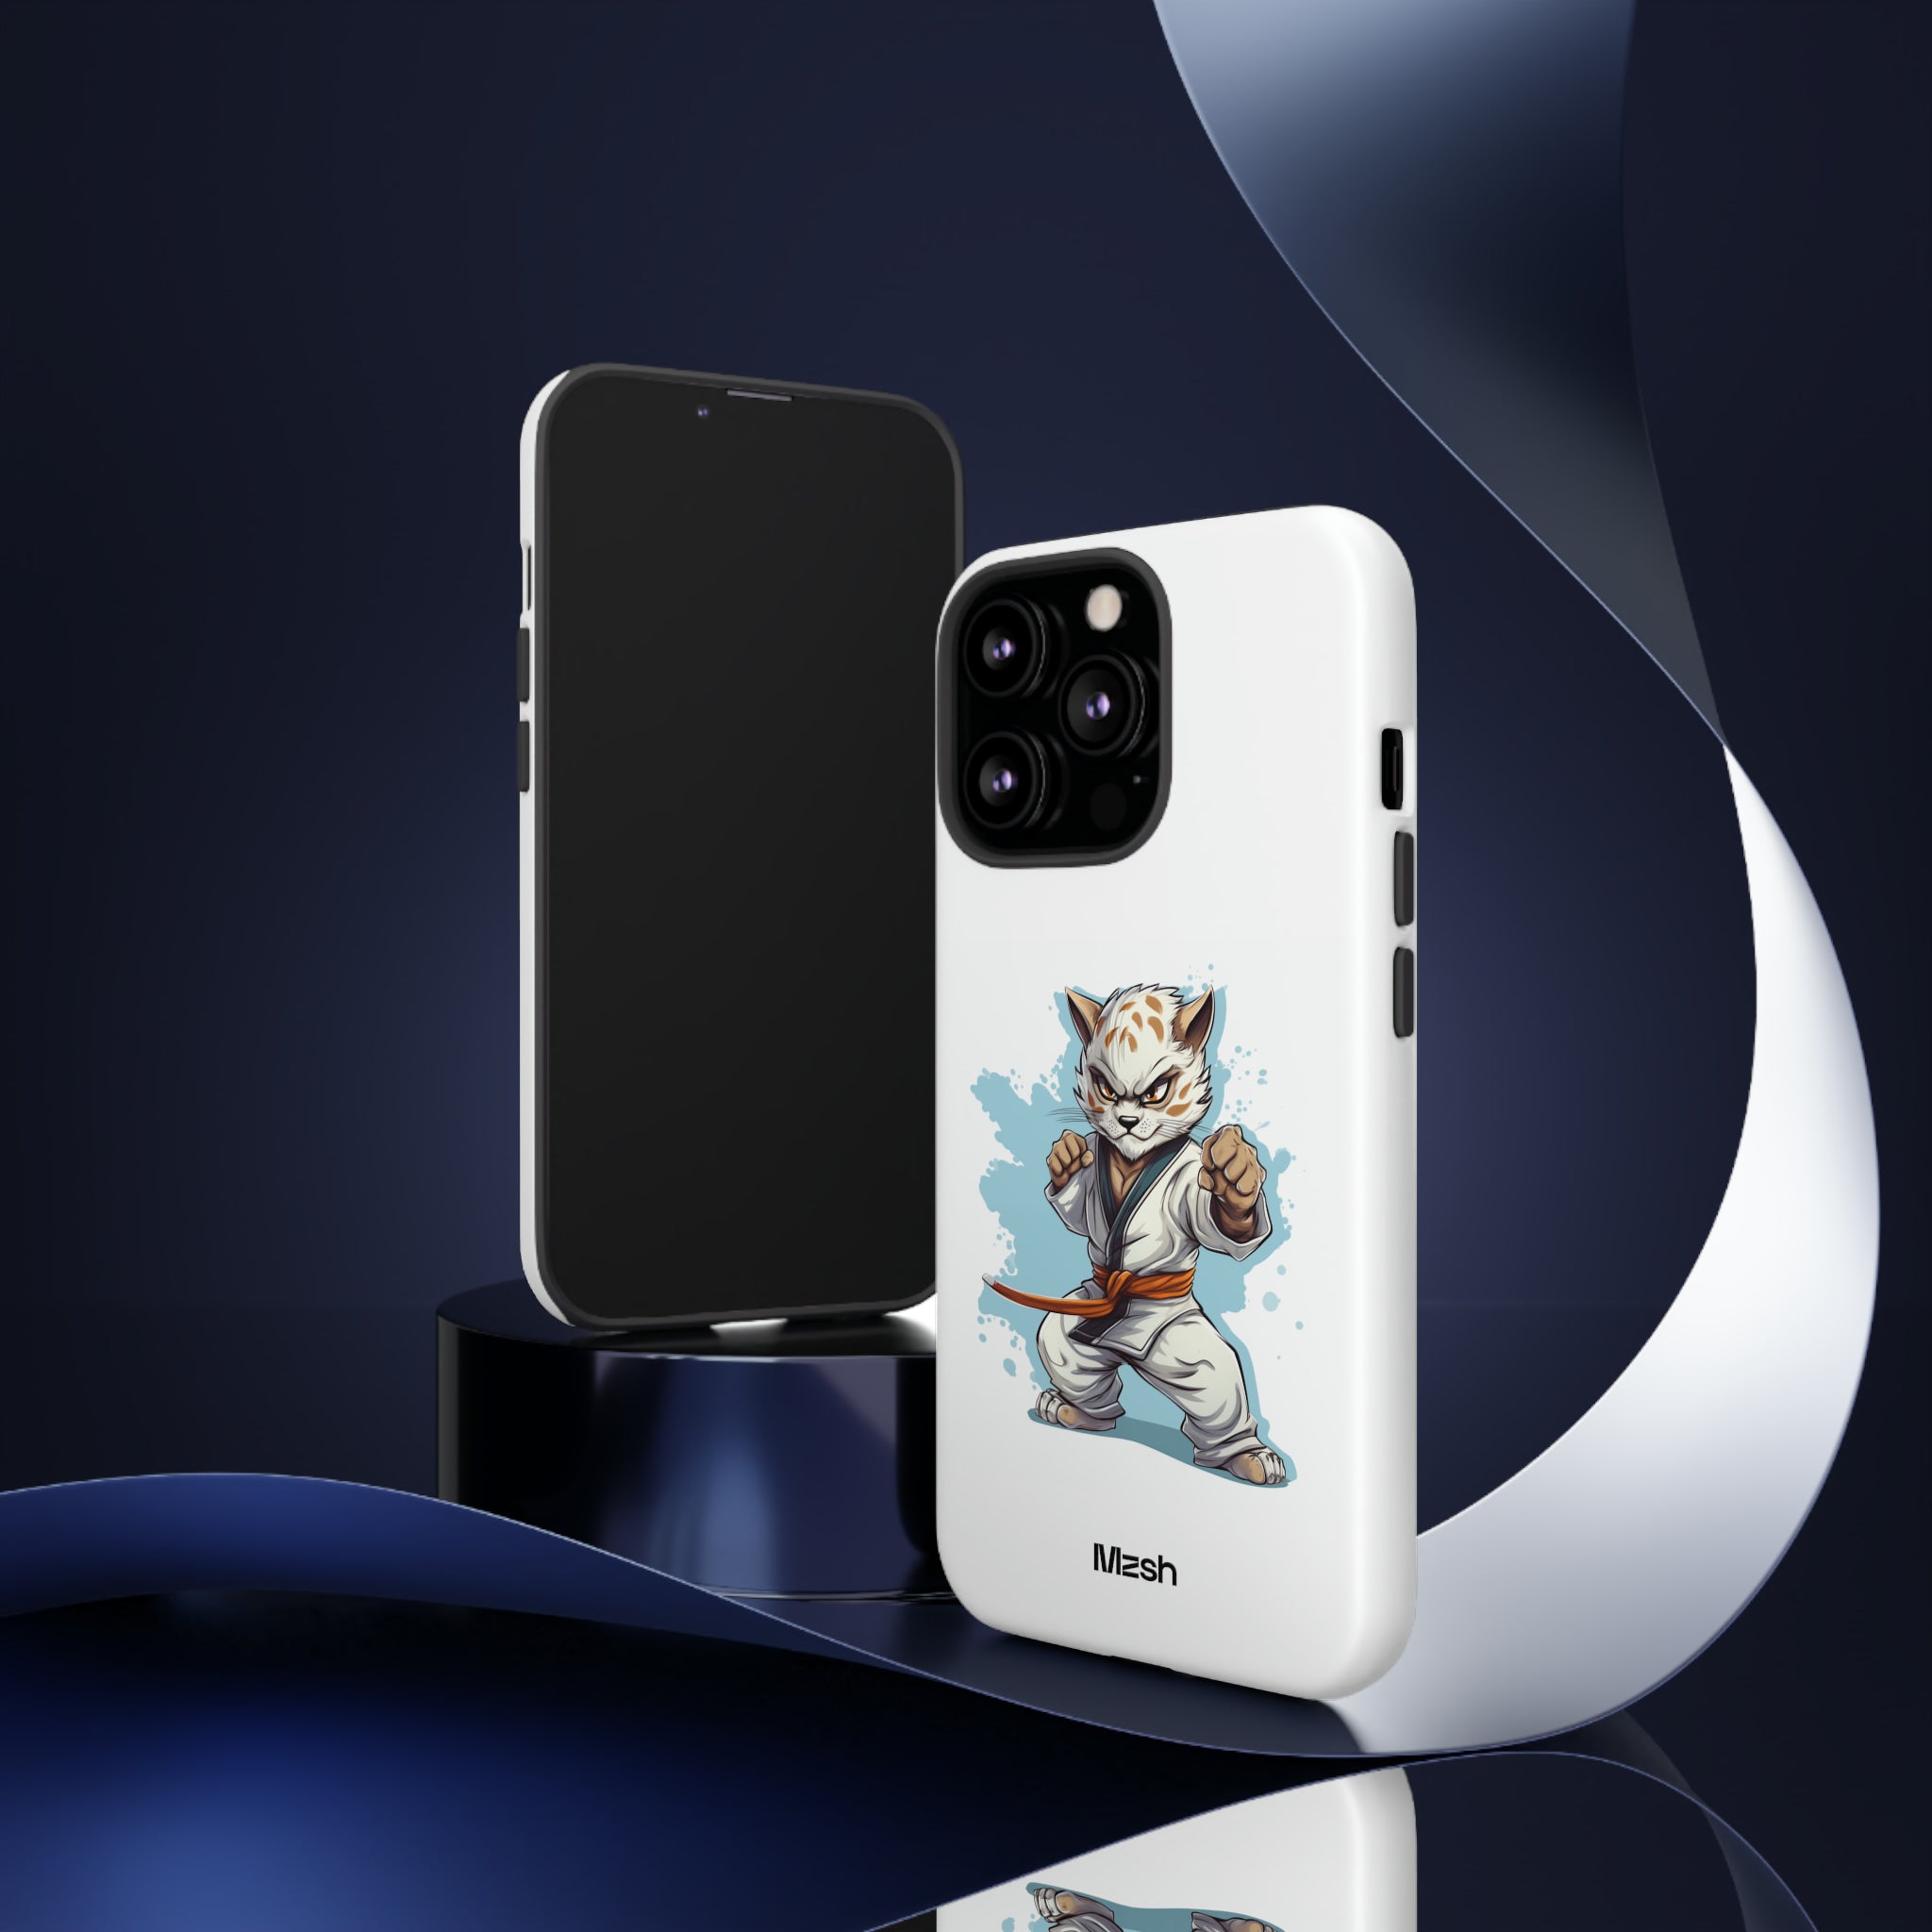 Kung Fu Tiger - iPhone Case